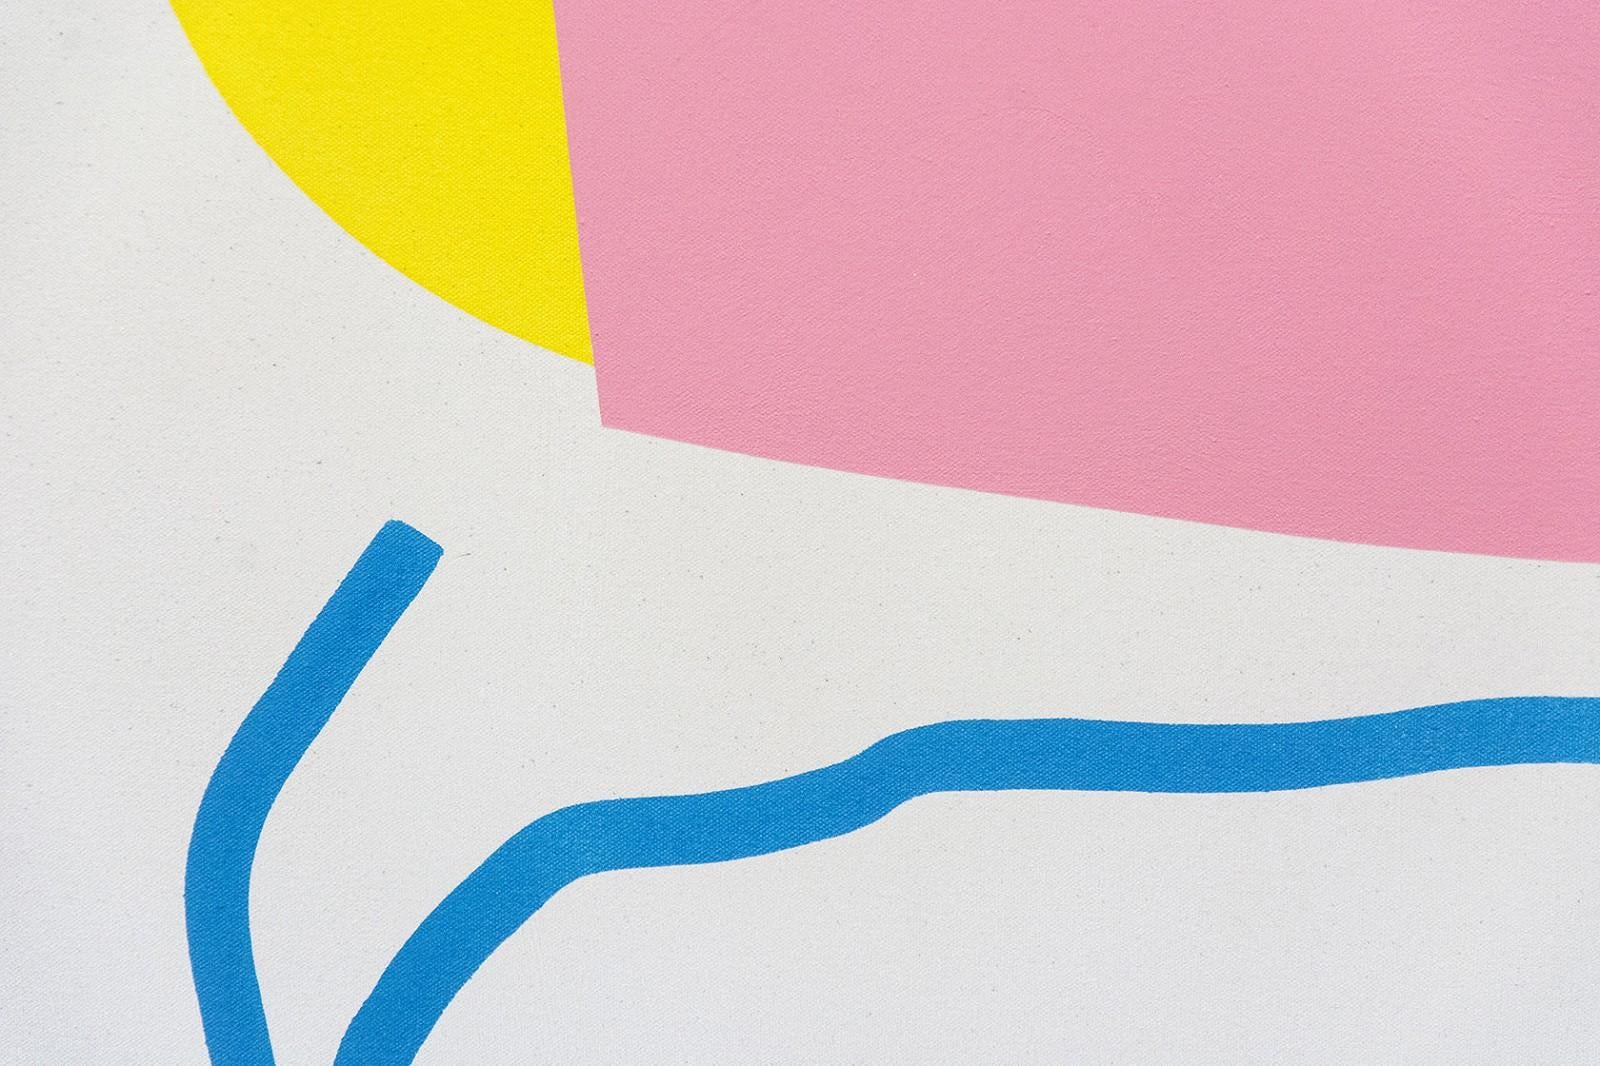 Pink Against Yellow with Blue Line - colorful abstract shapes, acrylic on canvas - Painting by Aron Hill